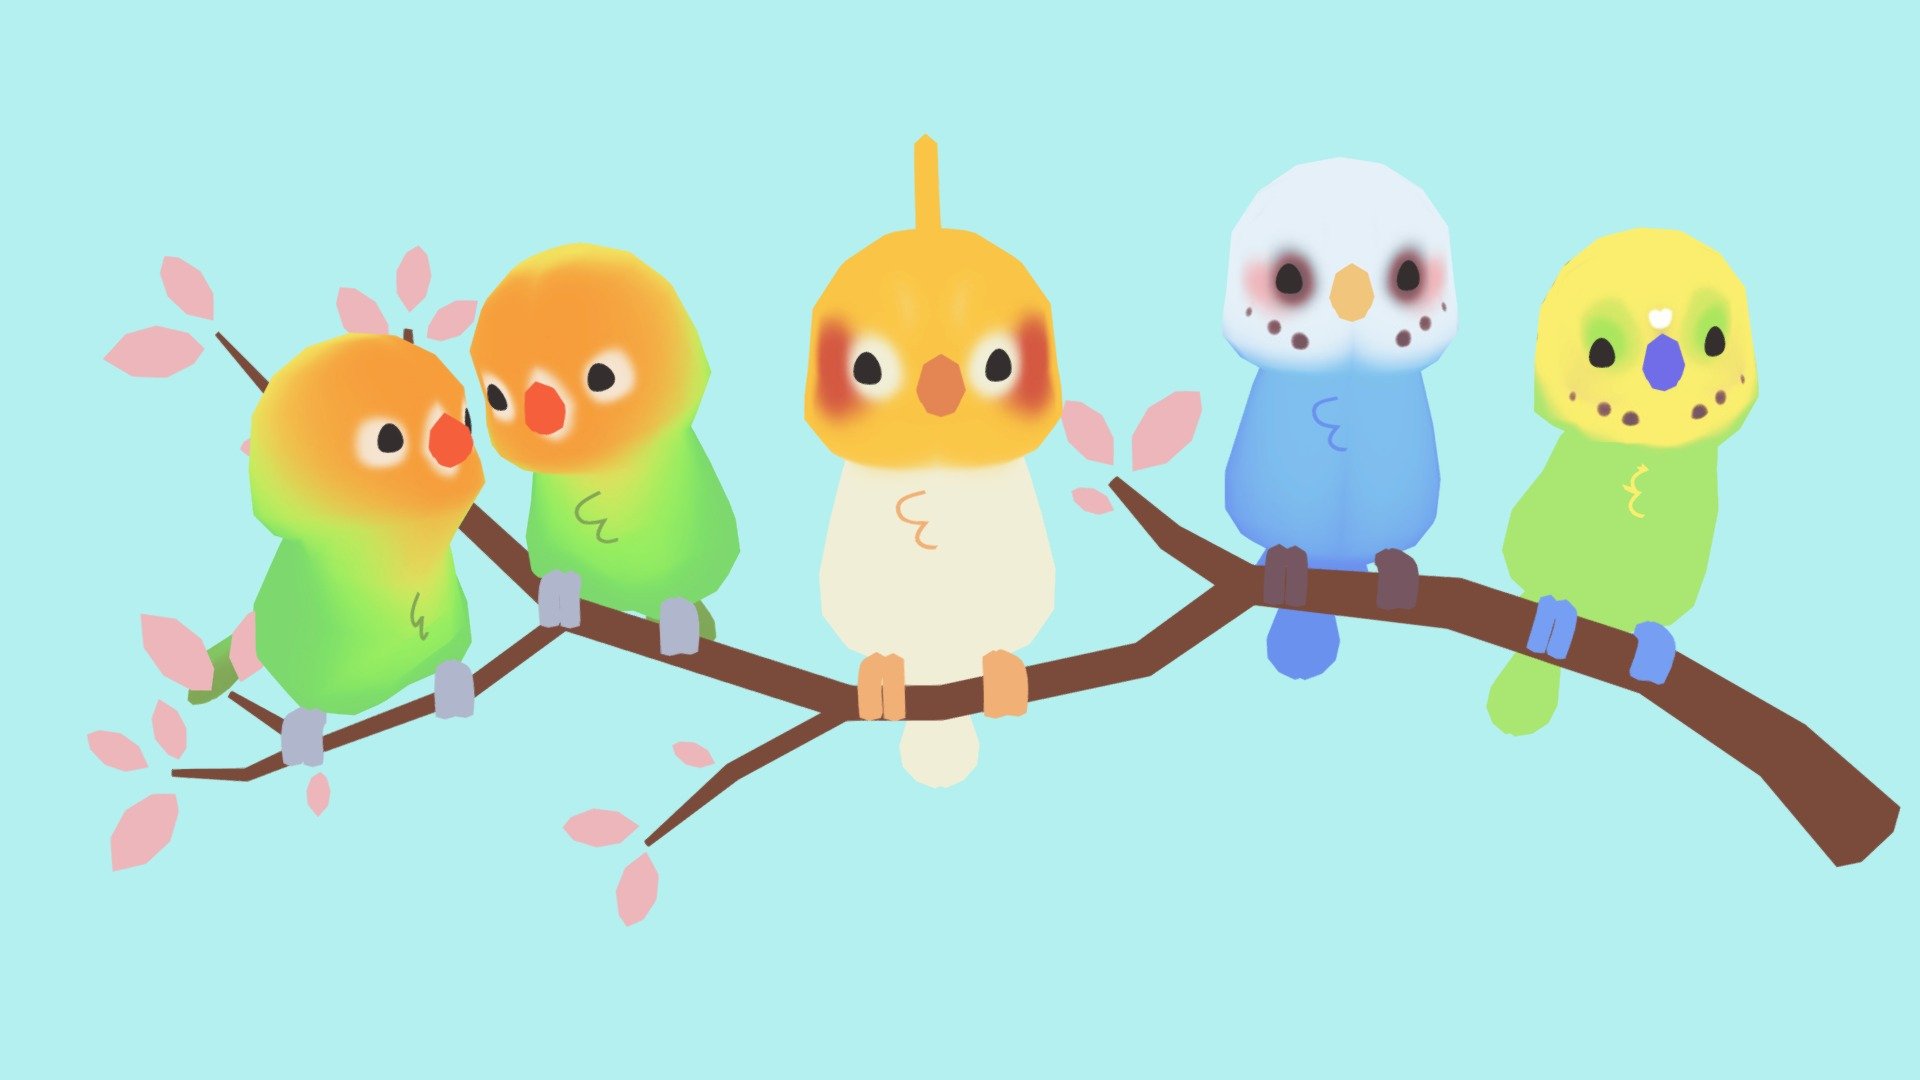 i'm not very good at animation and rigging so im trying to practice a little more, figured there's nothing better than some cute little birds

Song from &lsquo;birb sings to lettuce' link here - Tweety Tune - 3D model by Undoodle 3d model